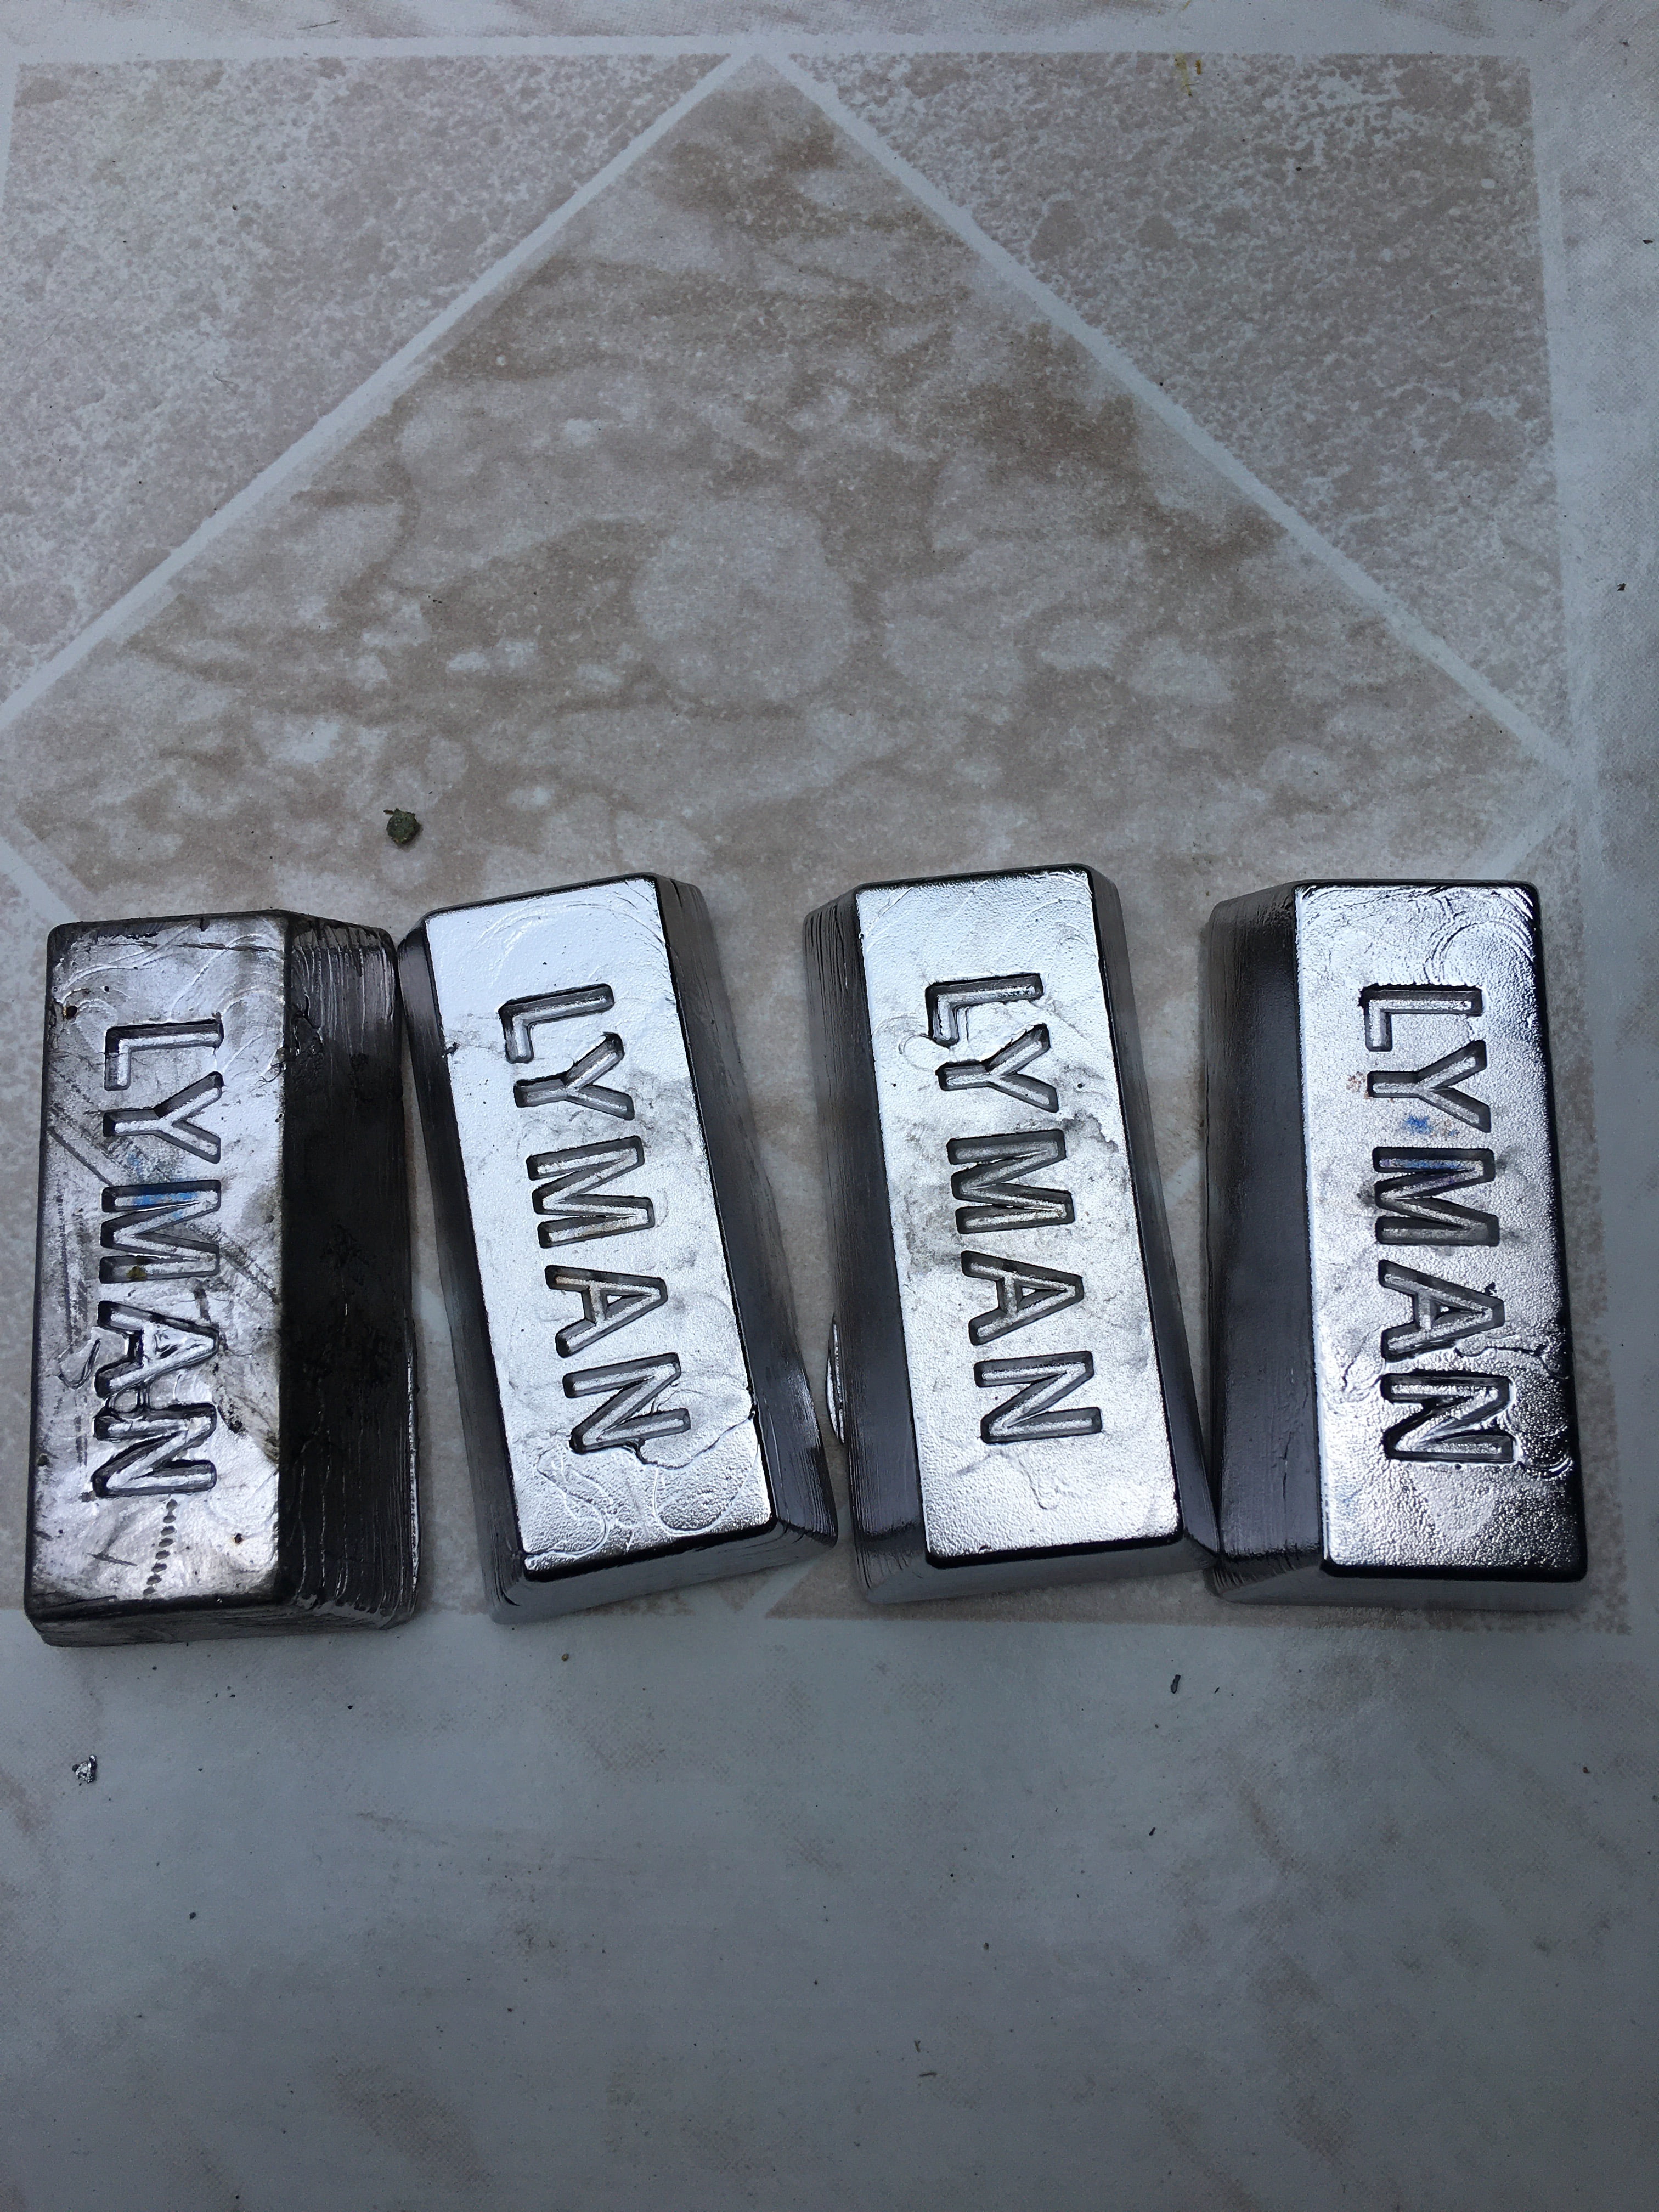 Fishing Glass Lead Ingots 1 pound Bars total 4 pounds for Sinker